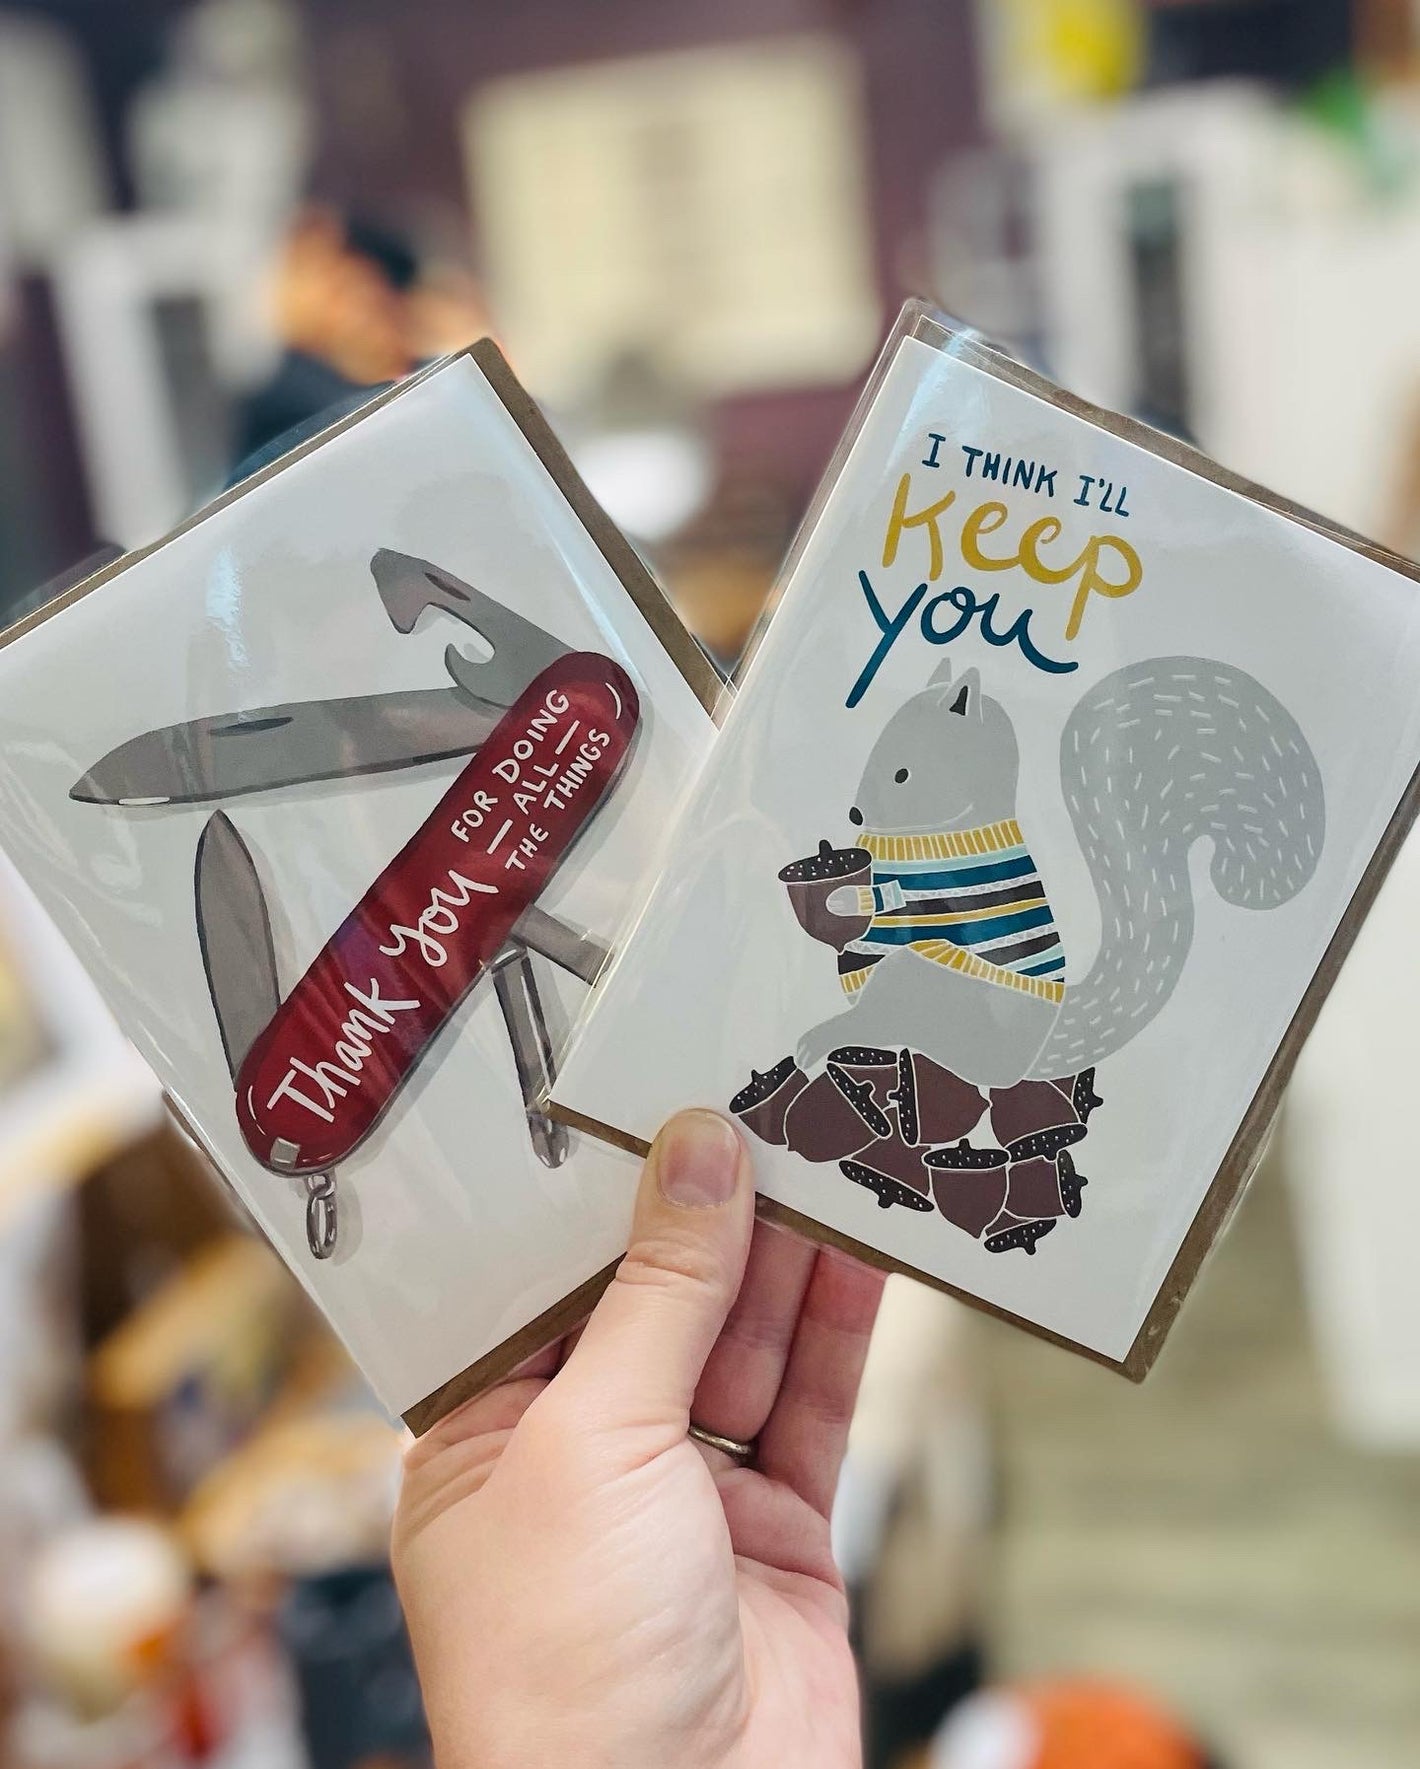 Image shows two greeting cards. One reads "thanks for doing all the things", with a graphic of a swiss army knife, and the other reads "I'll keep you" with a cute graphic of a squirrel holding a nut.